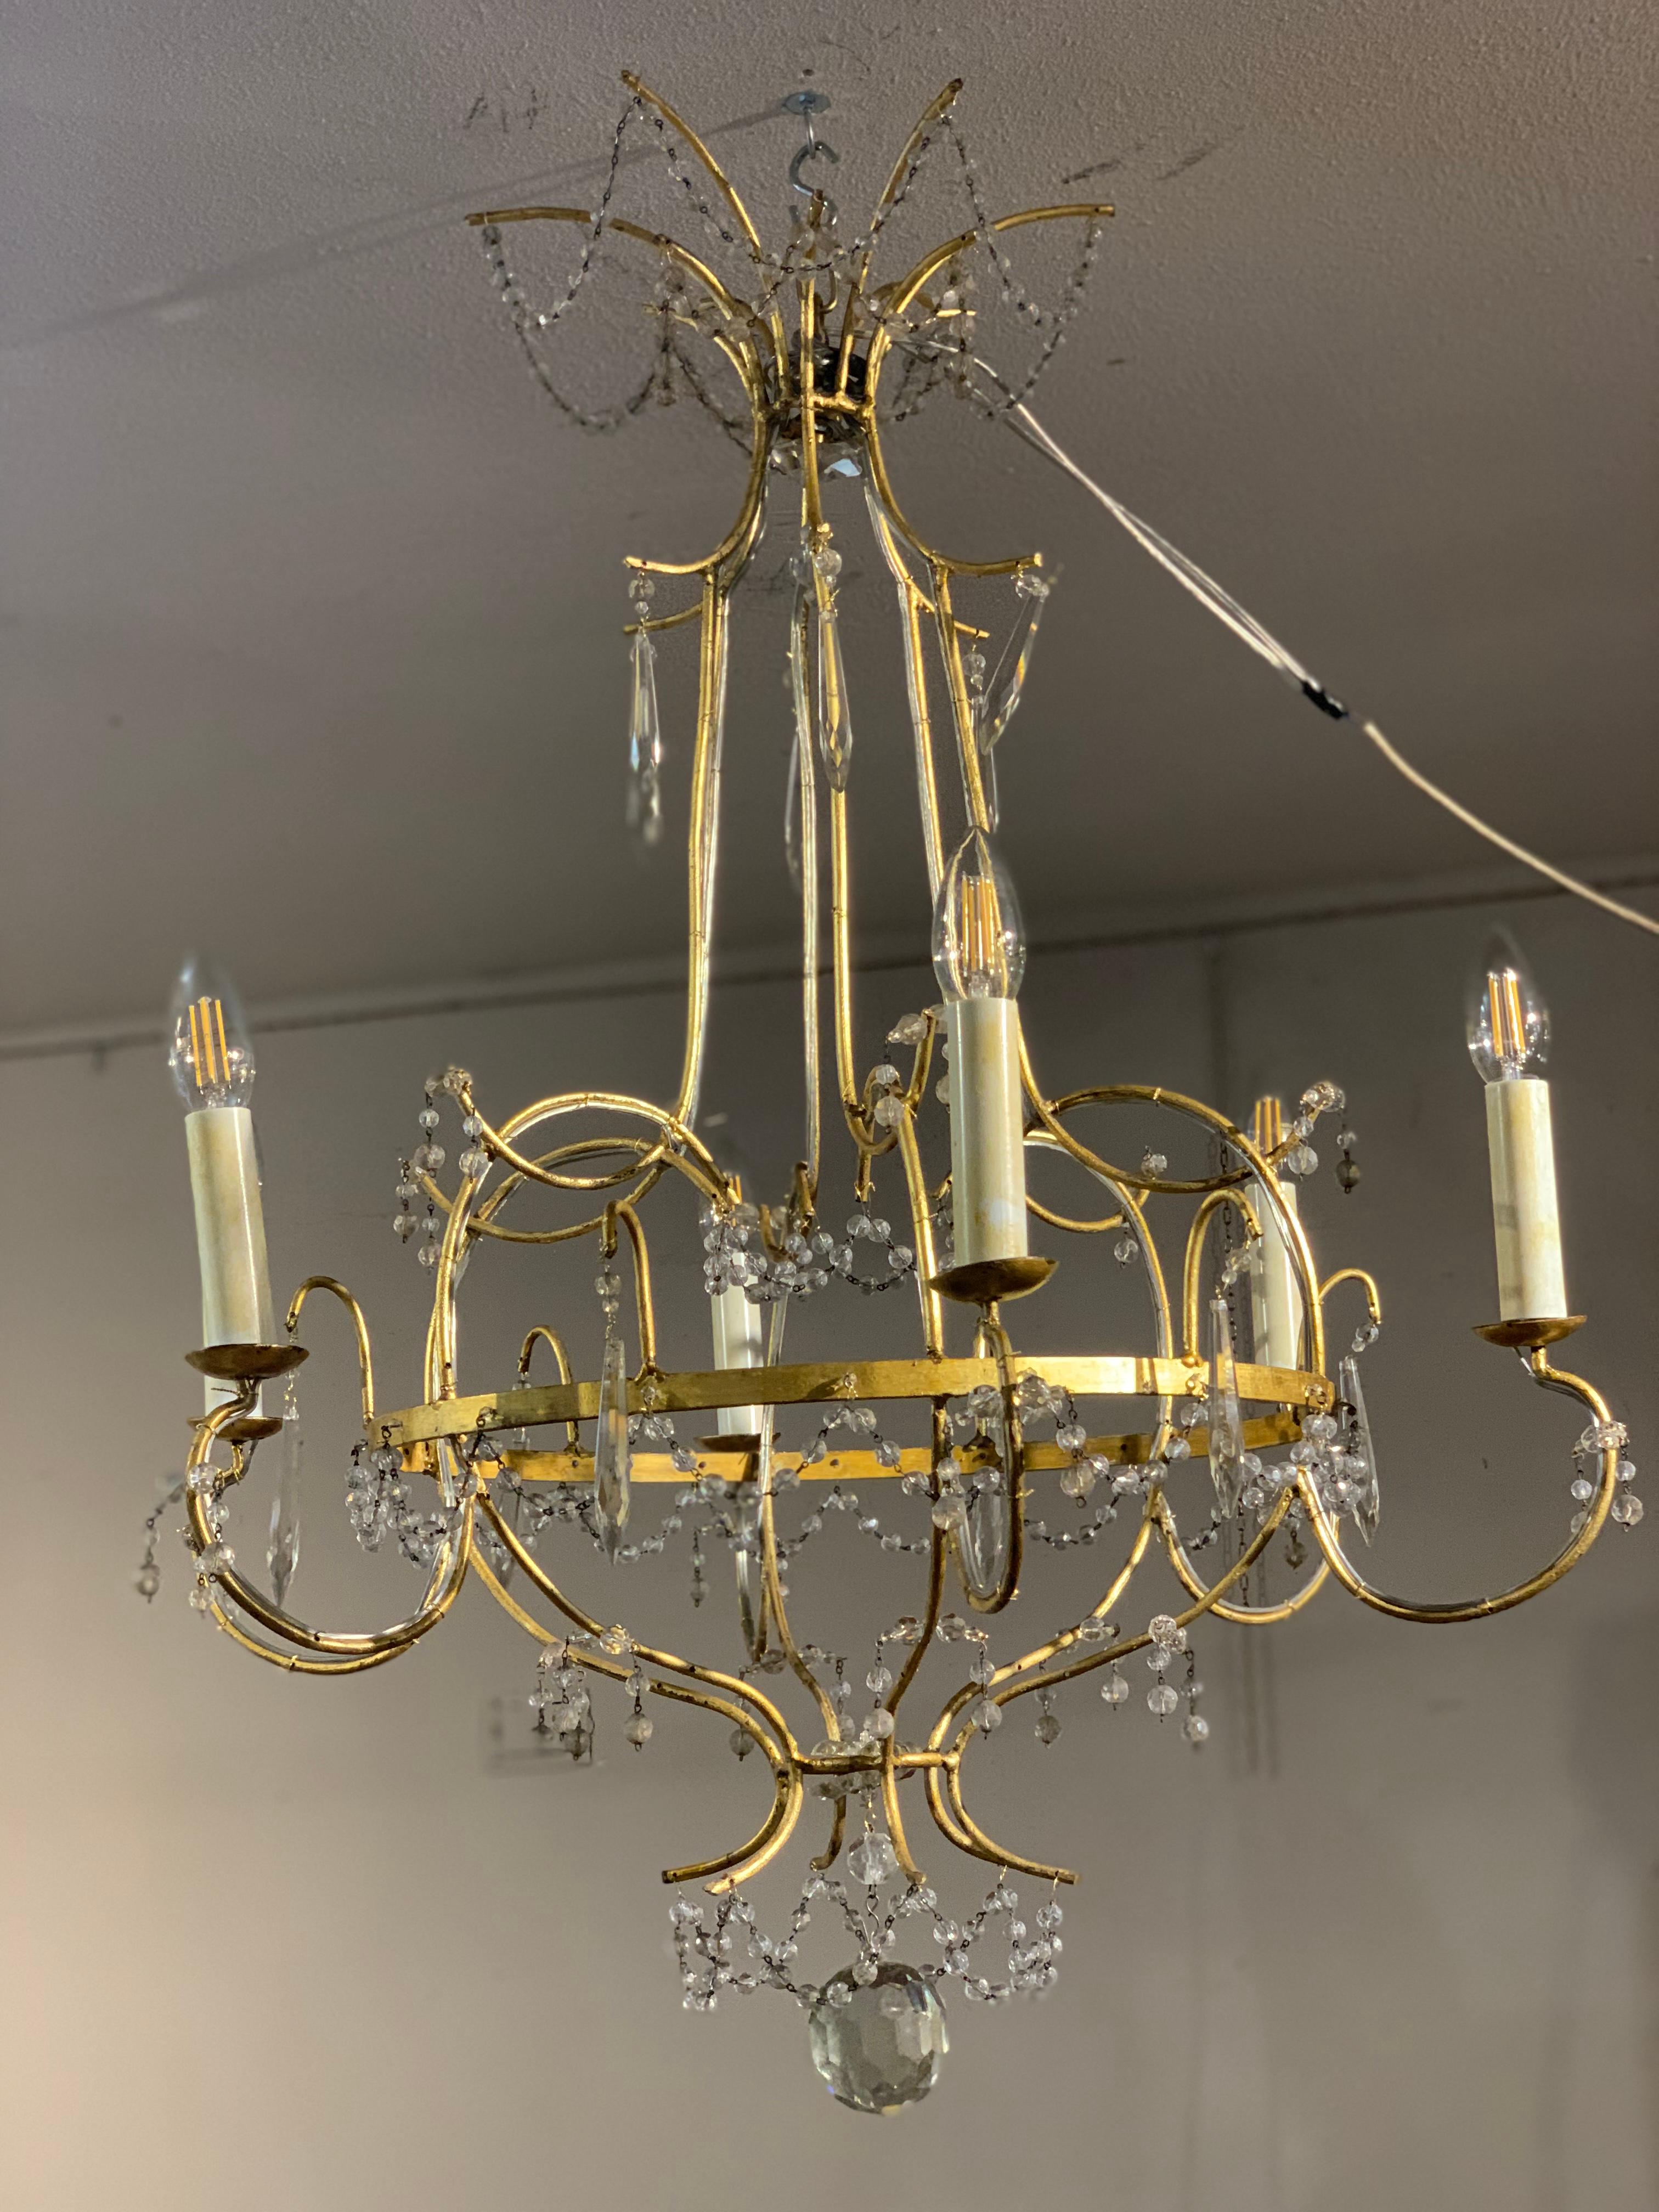 MID 18th CENTURY MARIA TERESA CHANDELIER For Sale 3